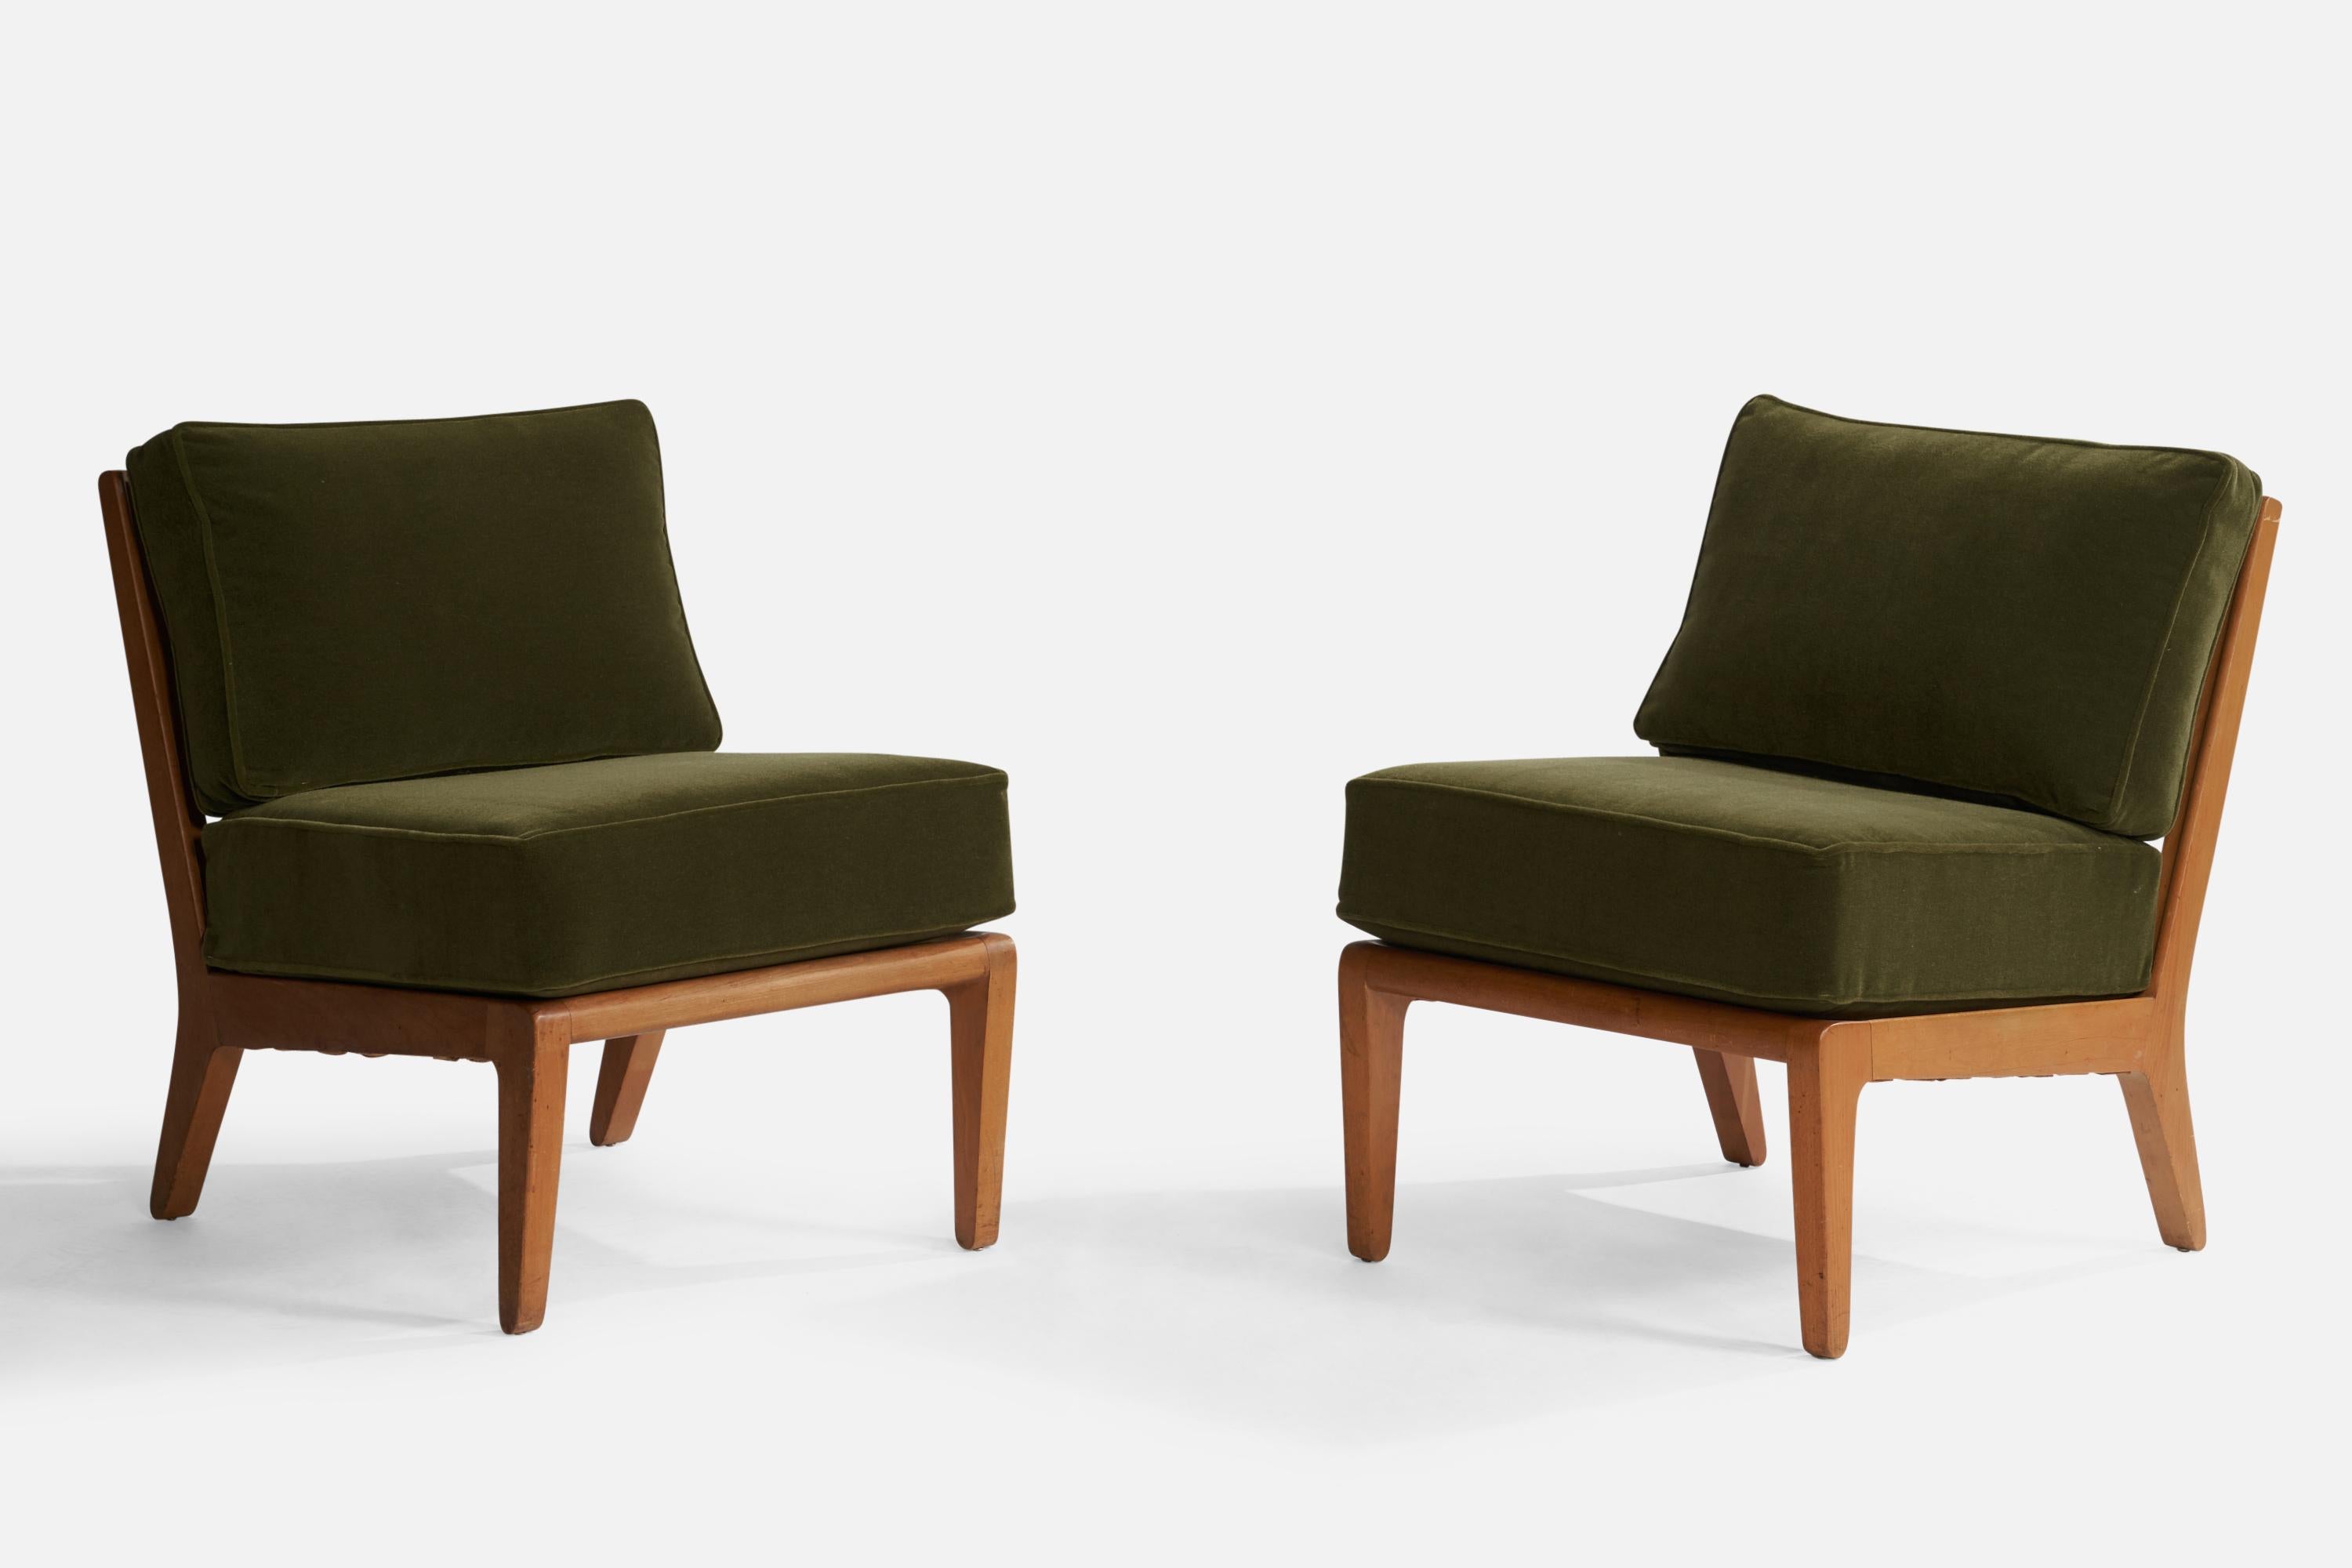 A pair of beech and green mohair slipper lounge chairs designed by Edward Wormley and produced by Drexel, USA, 1950s.

Seat height: 20.5” .